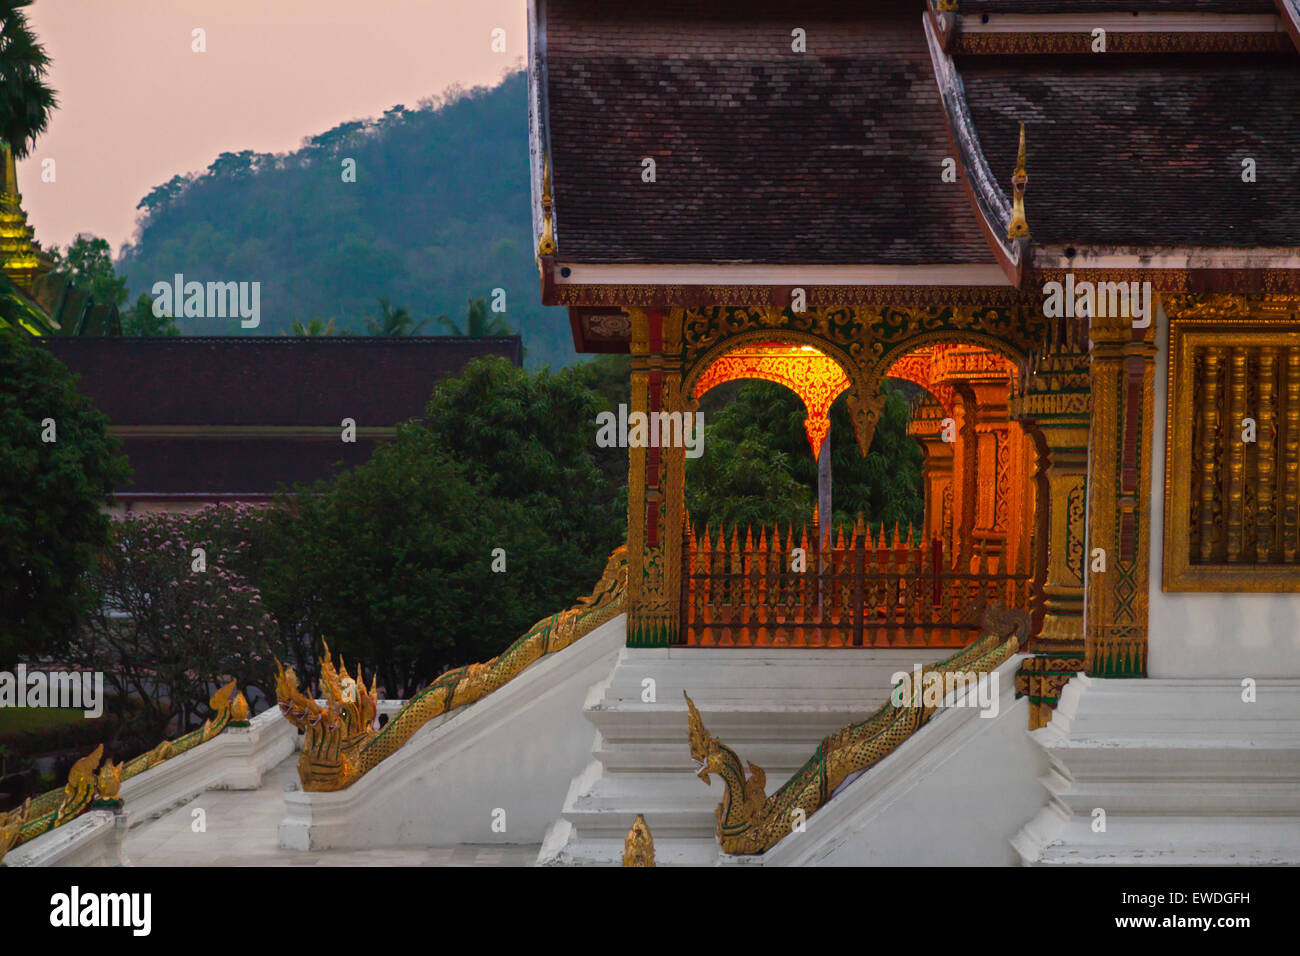 The HAW PHA BANG or Royal Temple is located in the Royal Palace complex - LUANG PRABANG, LAOS Stock Photo